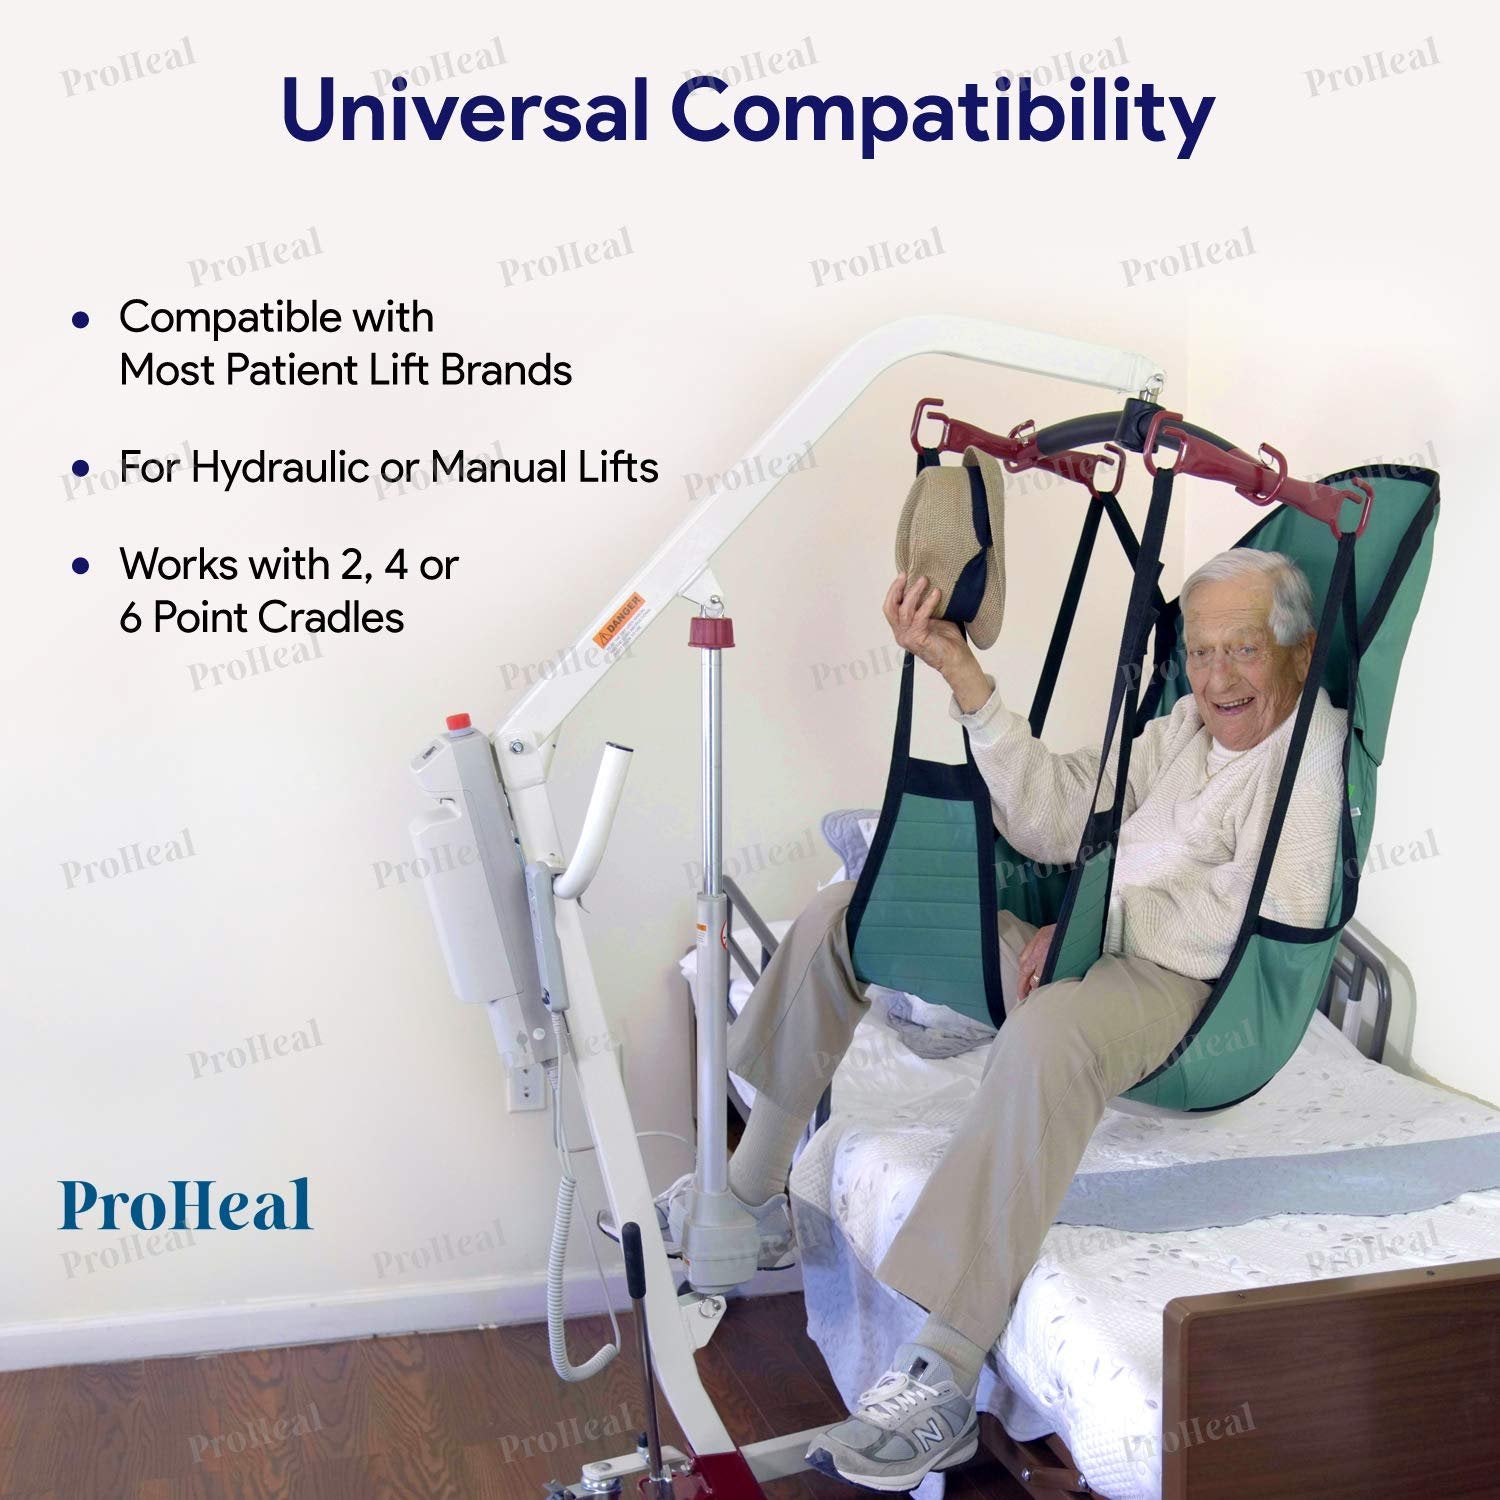 ProHeal Universal Padded Lift U Sling, X Large 44" x 48.5" - Polyester Divided Leg Slings for Patient Lifts - Compatible with Hoyer, Invacare, McKesson, Drive, Lumex, Joerns and More